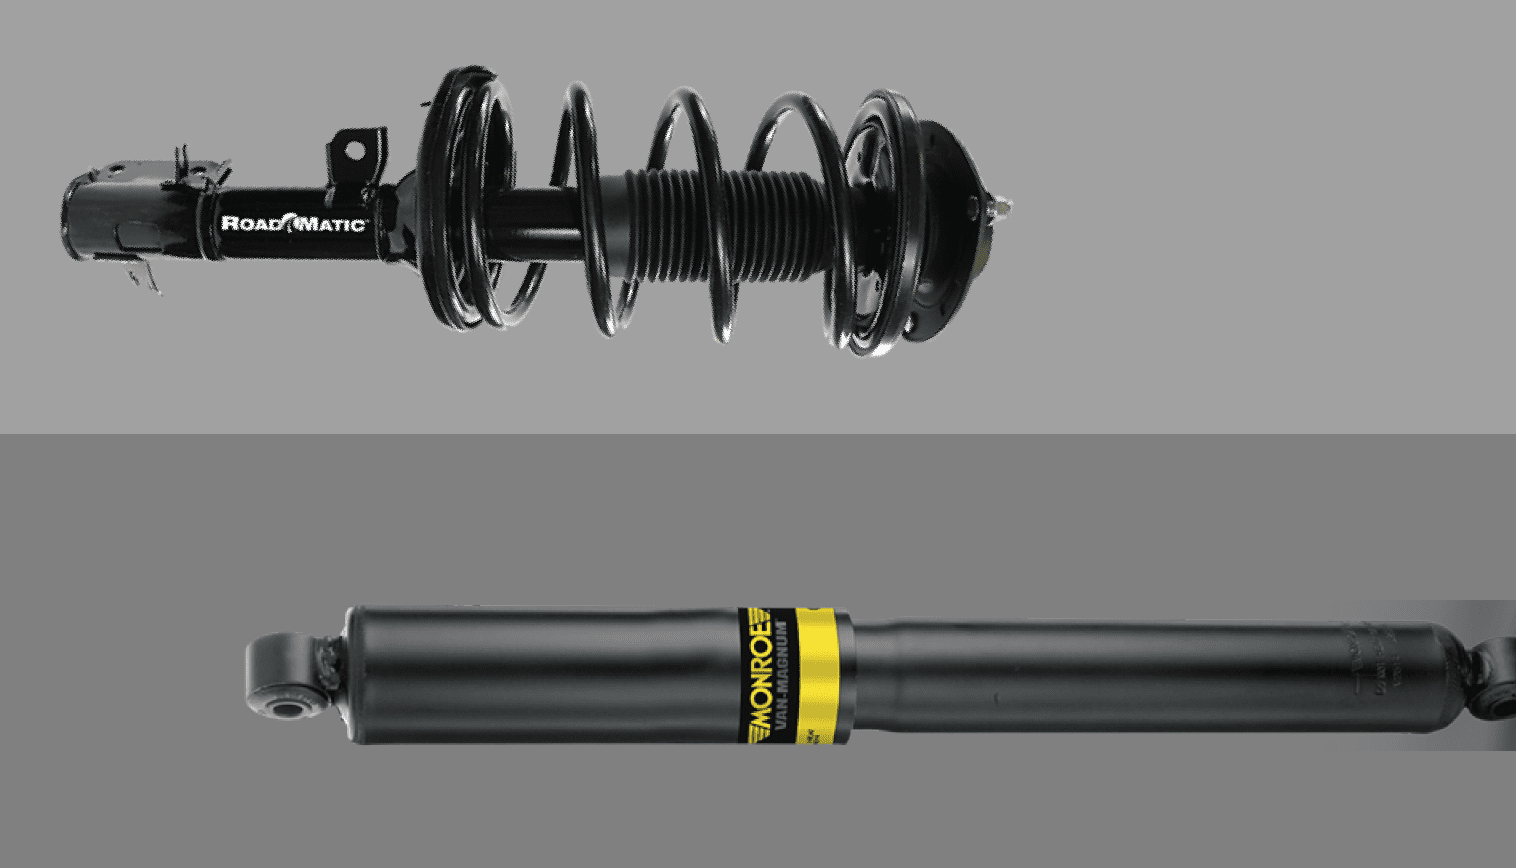 What is the difference between a strut and a shock absorber